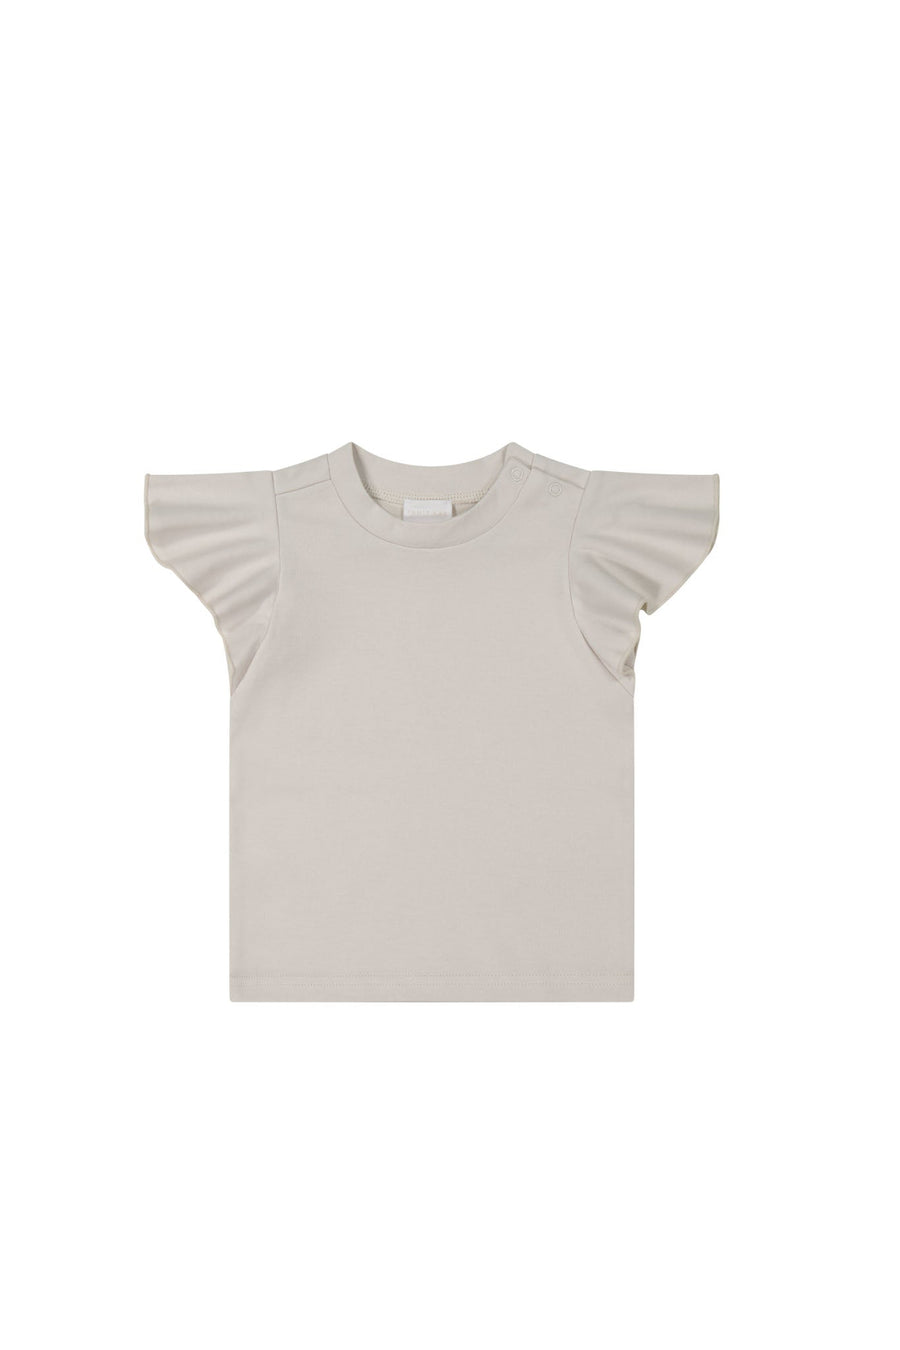 Pima Cotton Giselle Top - Luna Childrens Top from Jamie Kay USA